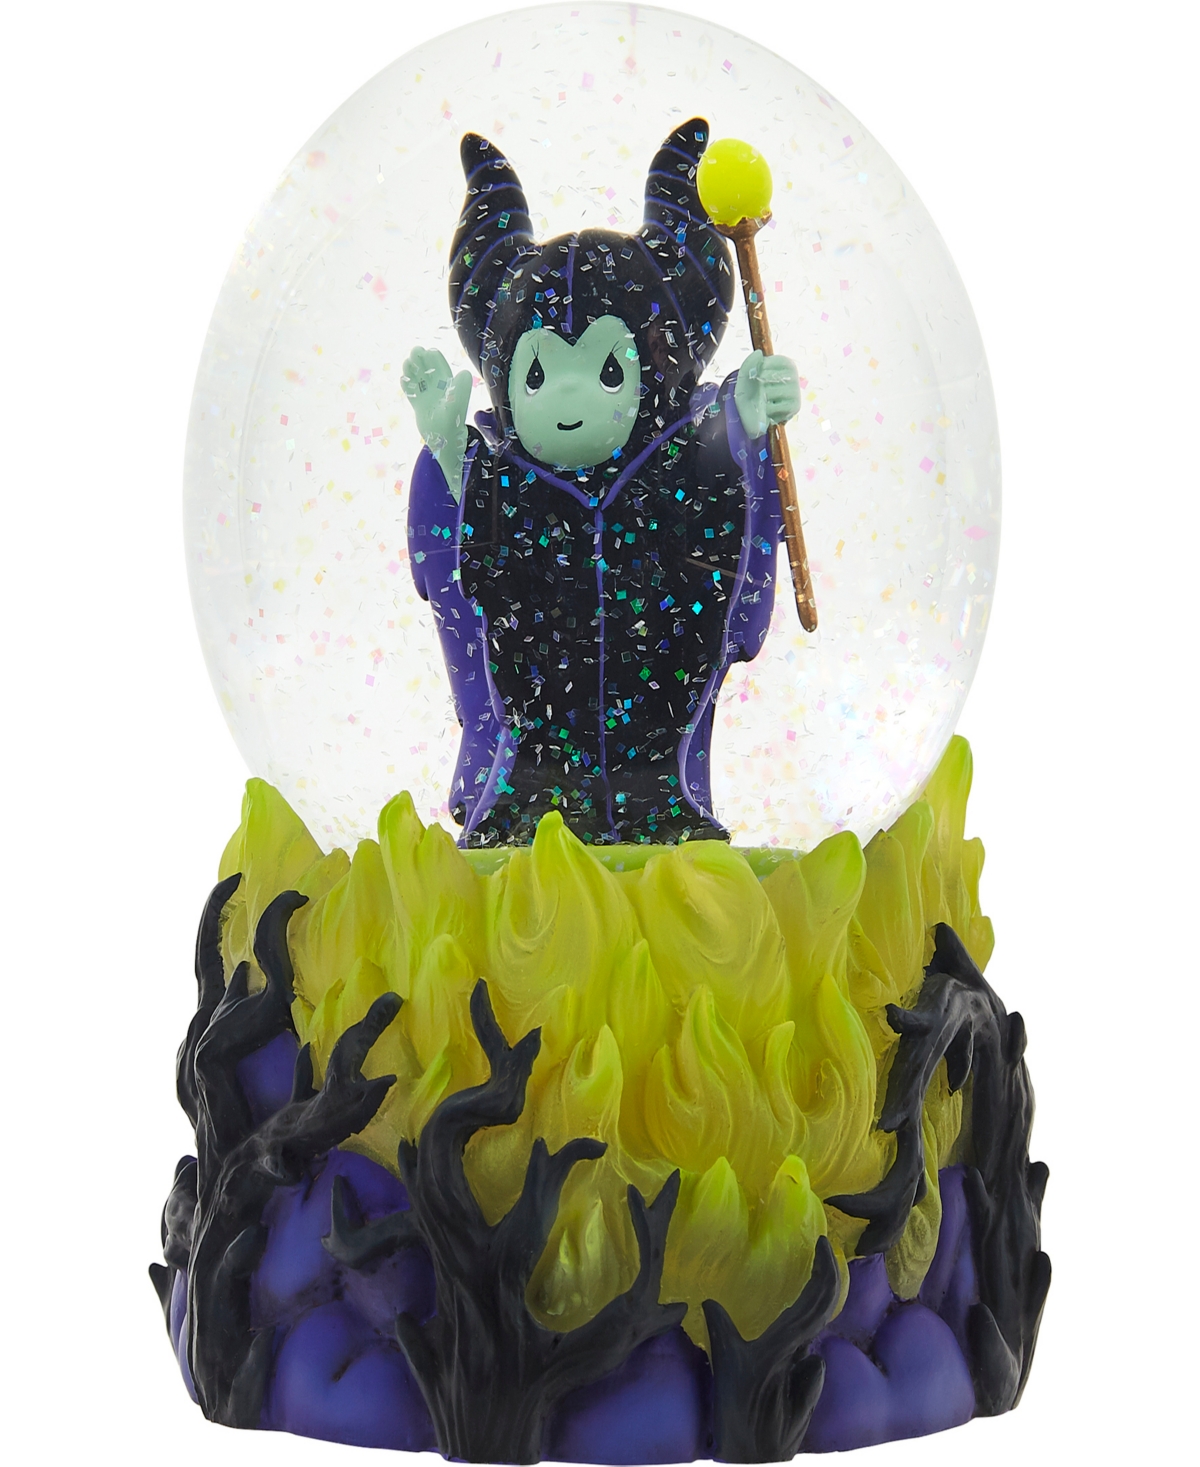 Precious Moments 222104 Disney Maleficent Musical Resin And Glass Snow Globe In Multicolored